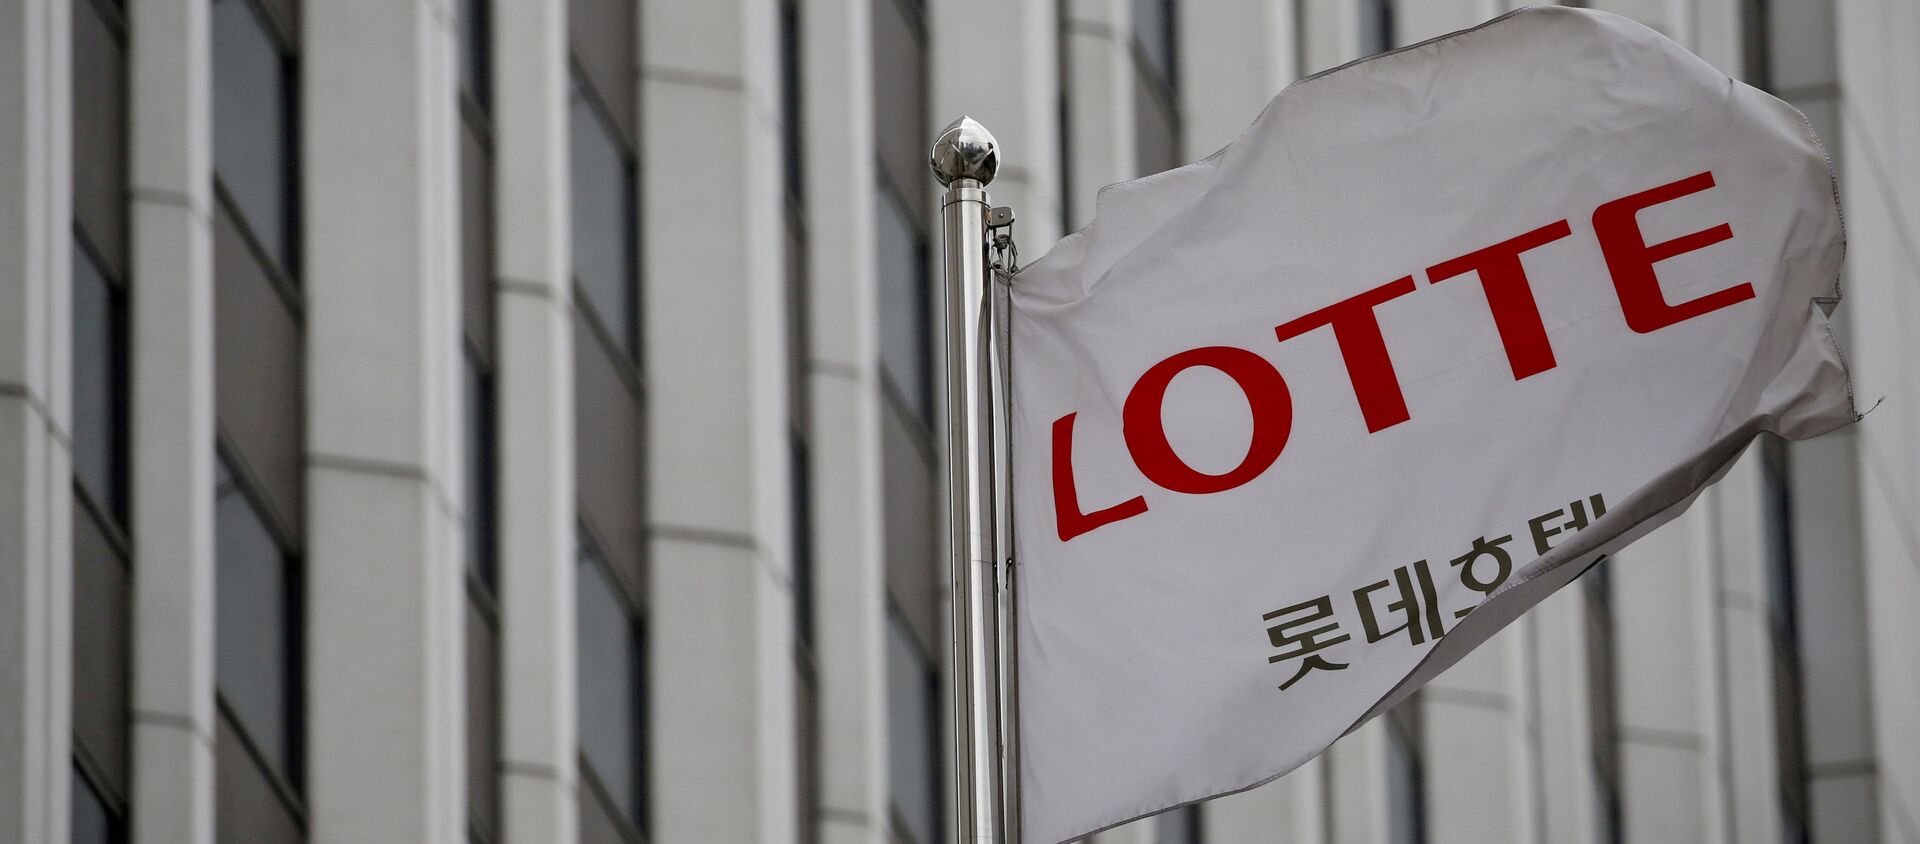 A flag bearing the logo of Lotte Hotel flutters at a Lotte Hotel - 俄羅斯衛星通訊社, 1920, 27.10.2020